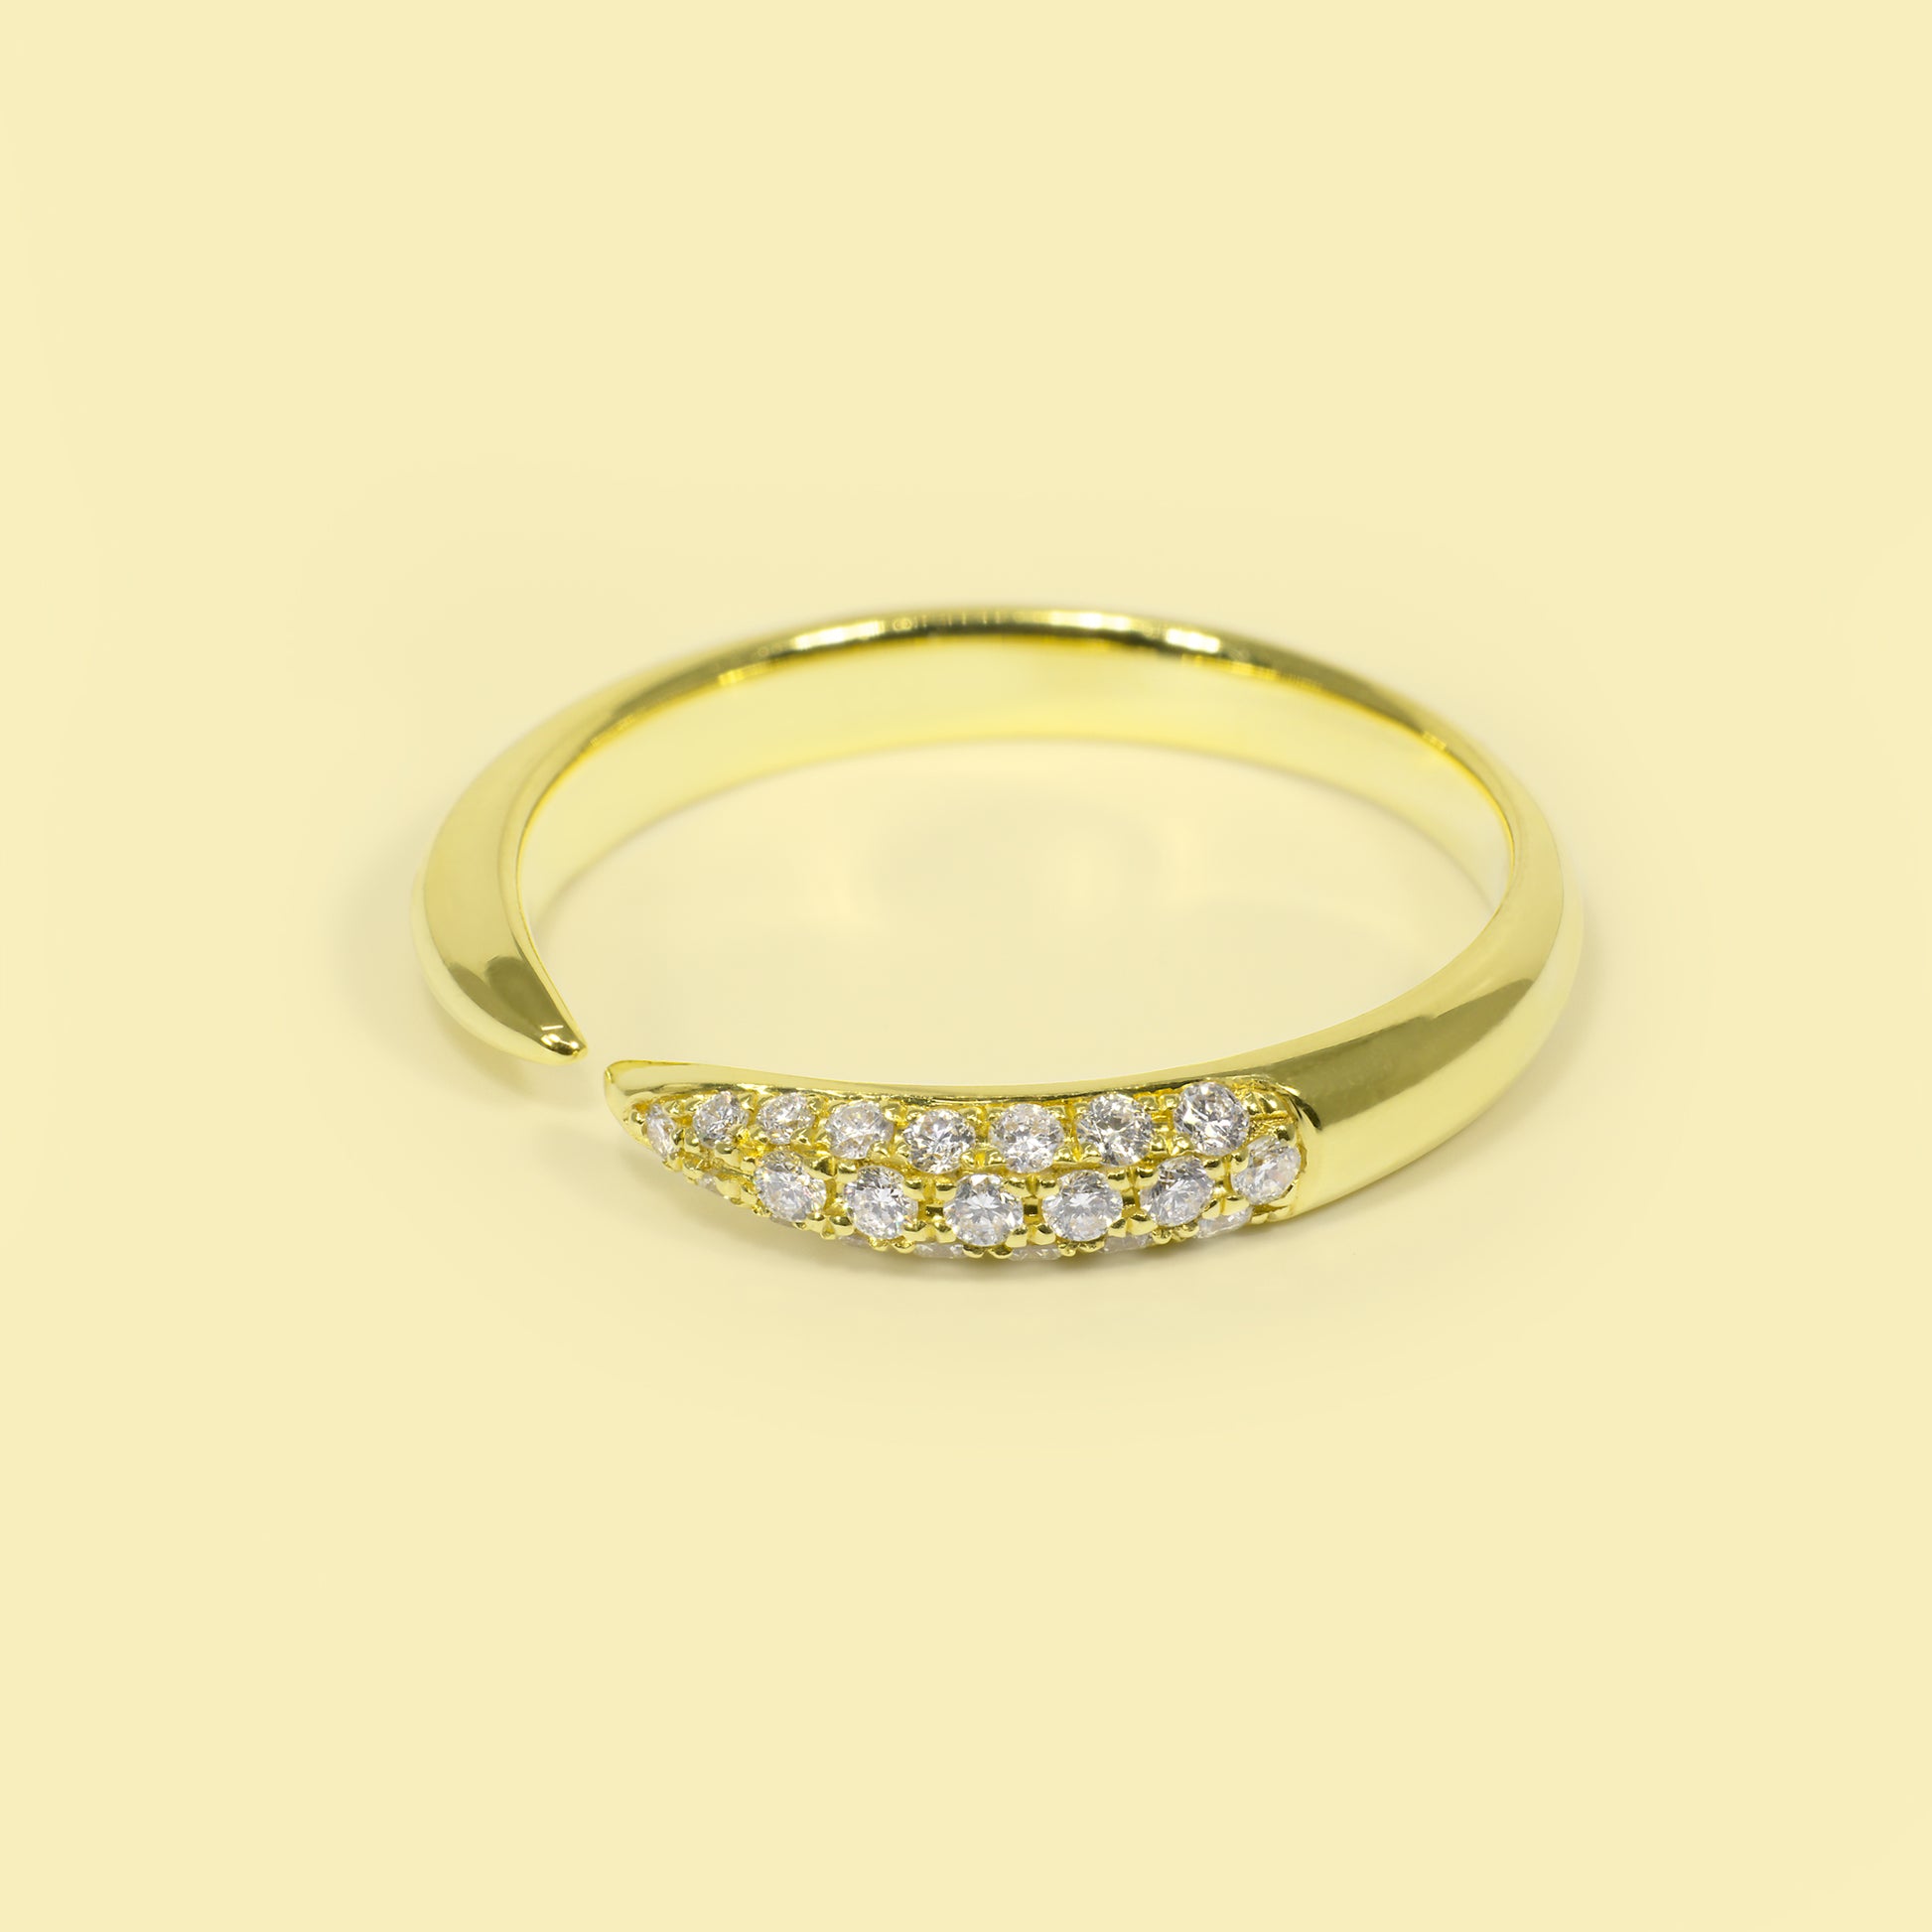 Viki Open Claw Stackable Lab-grown Diamond Ring Handcrafted in 14K or 18K Solid Gold by Earthena Jewelry